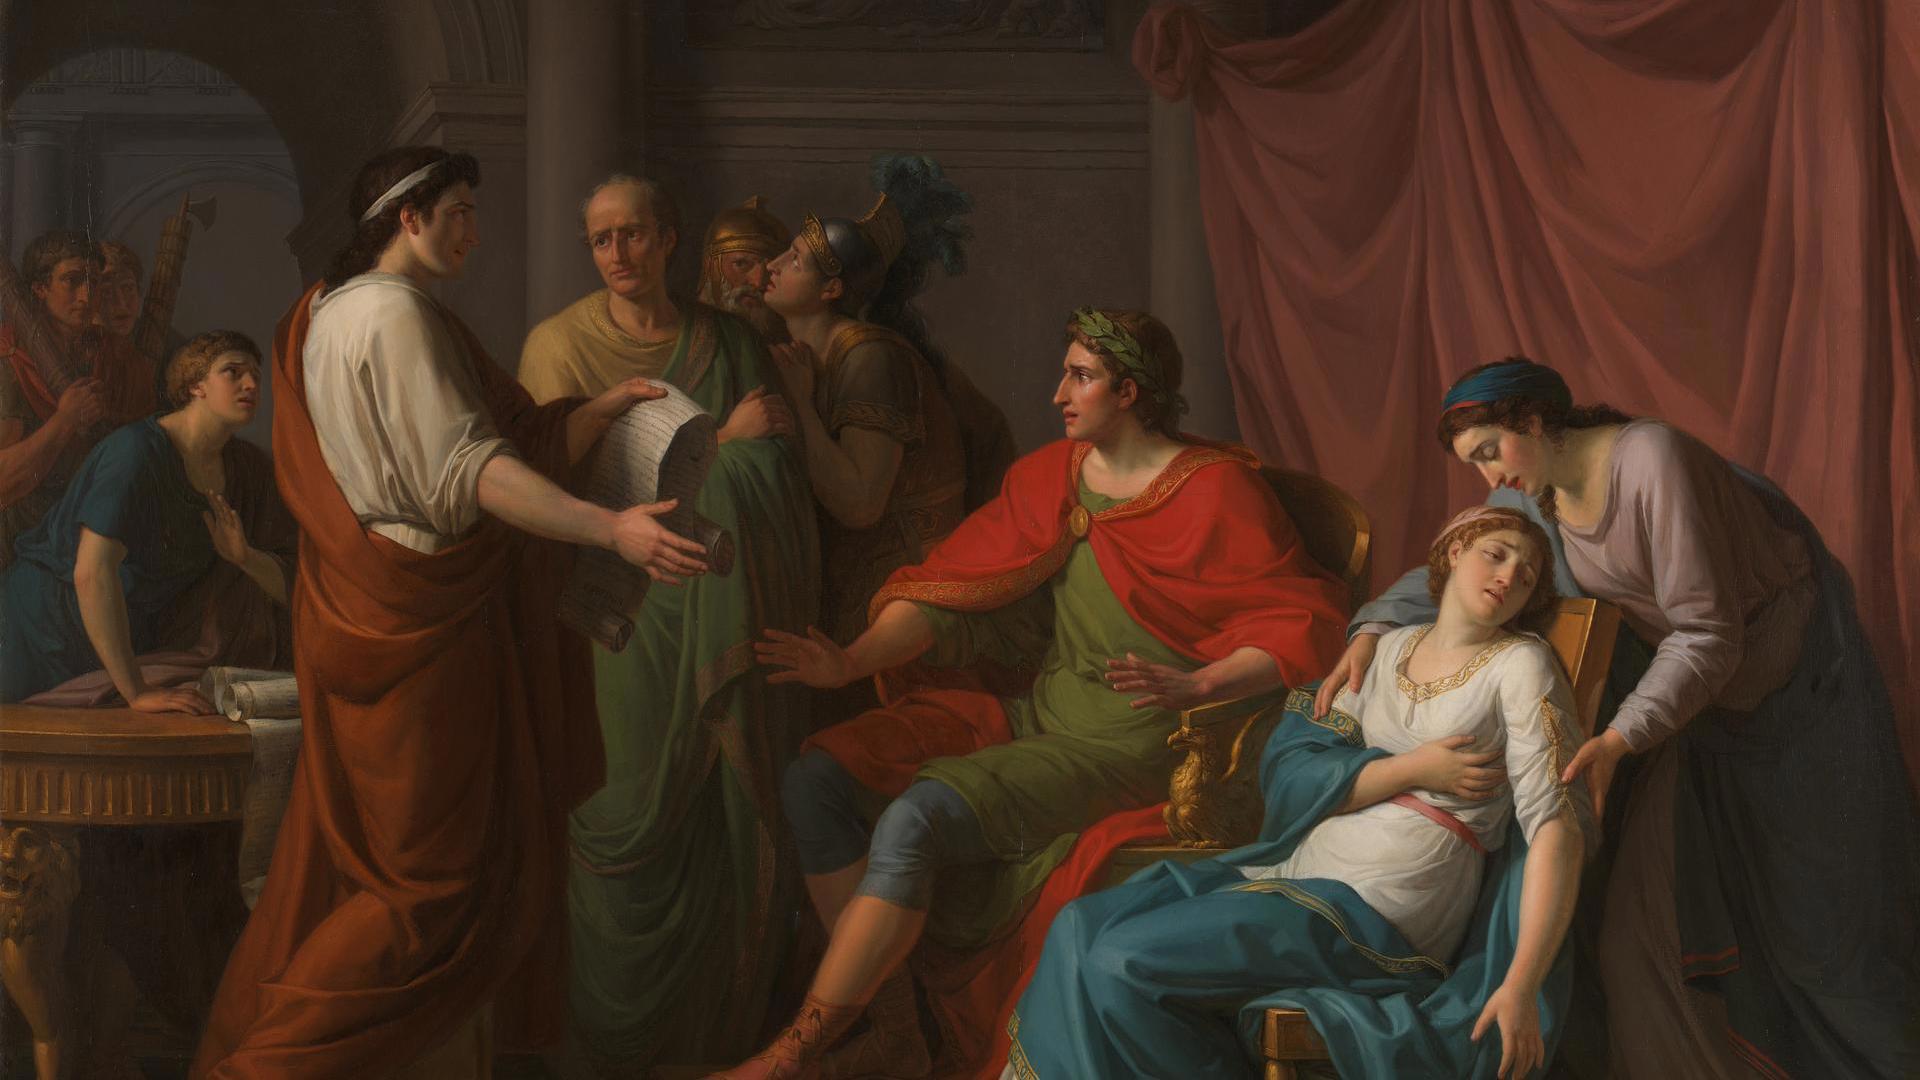 Virgil reading the Aeneid to Augustus and Octavia by Jean-Joseph Taillasson